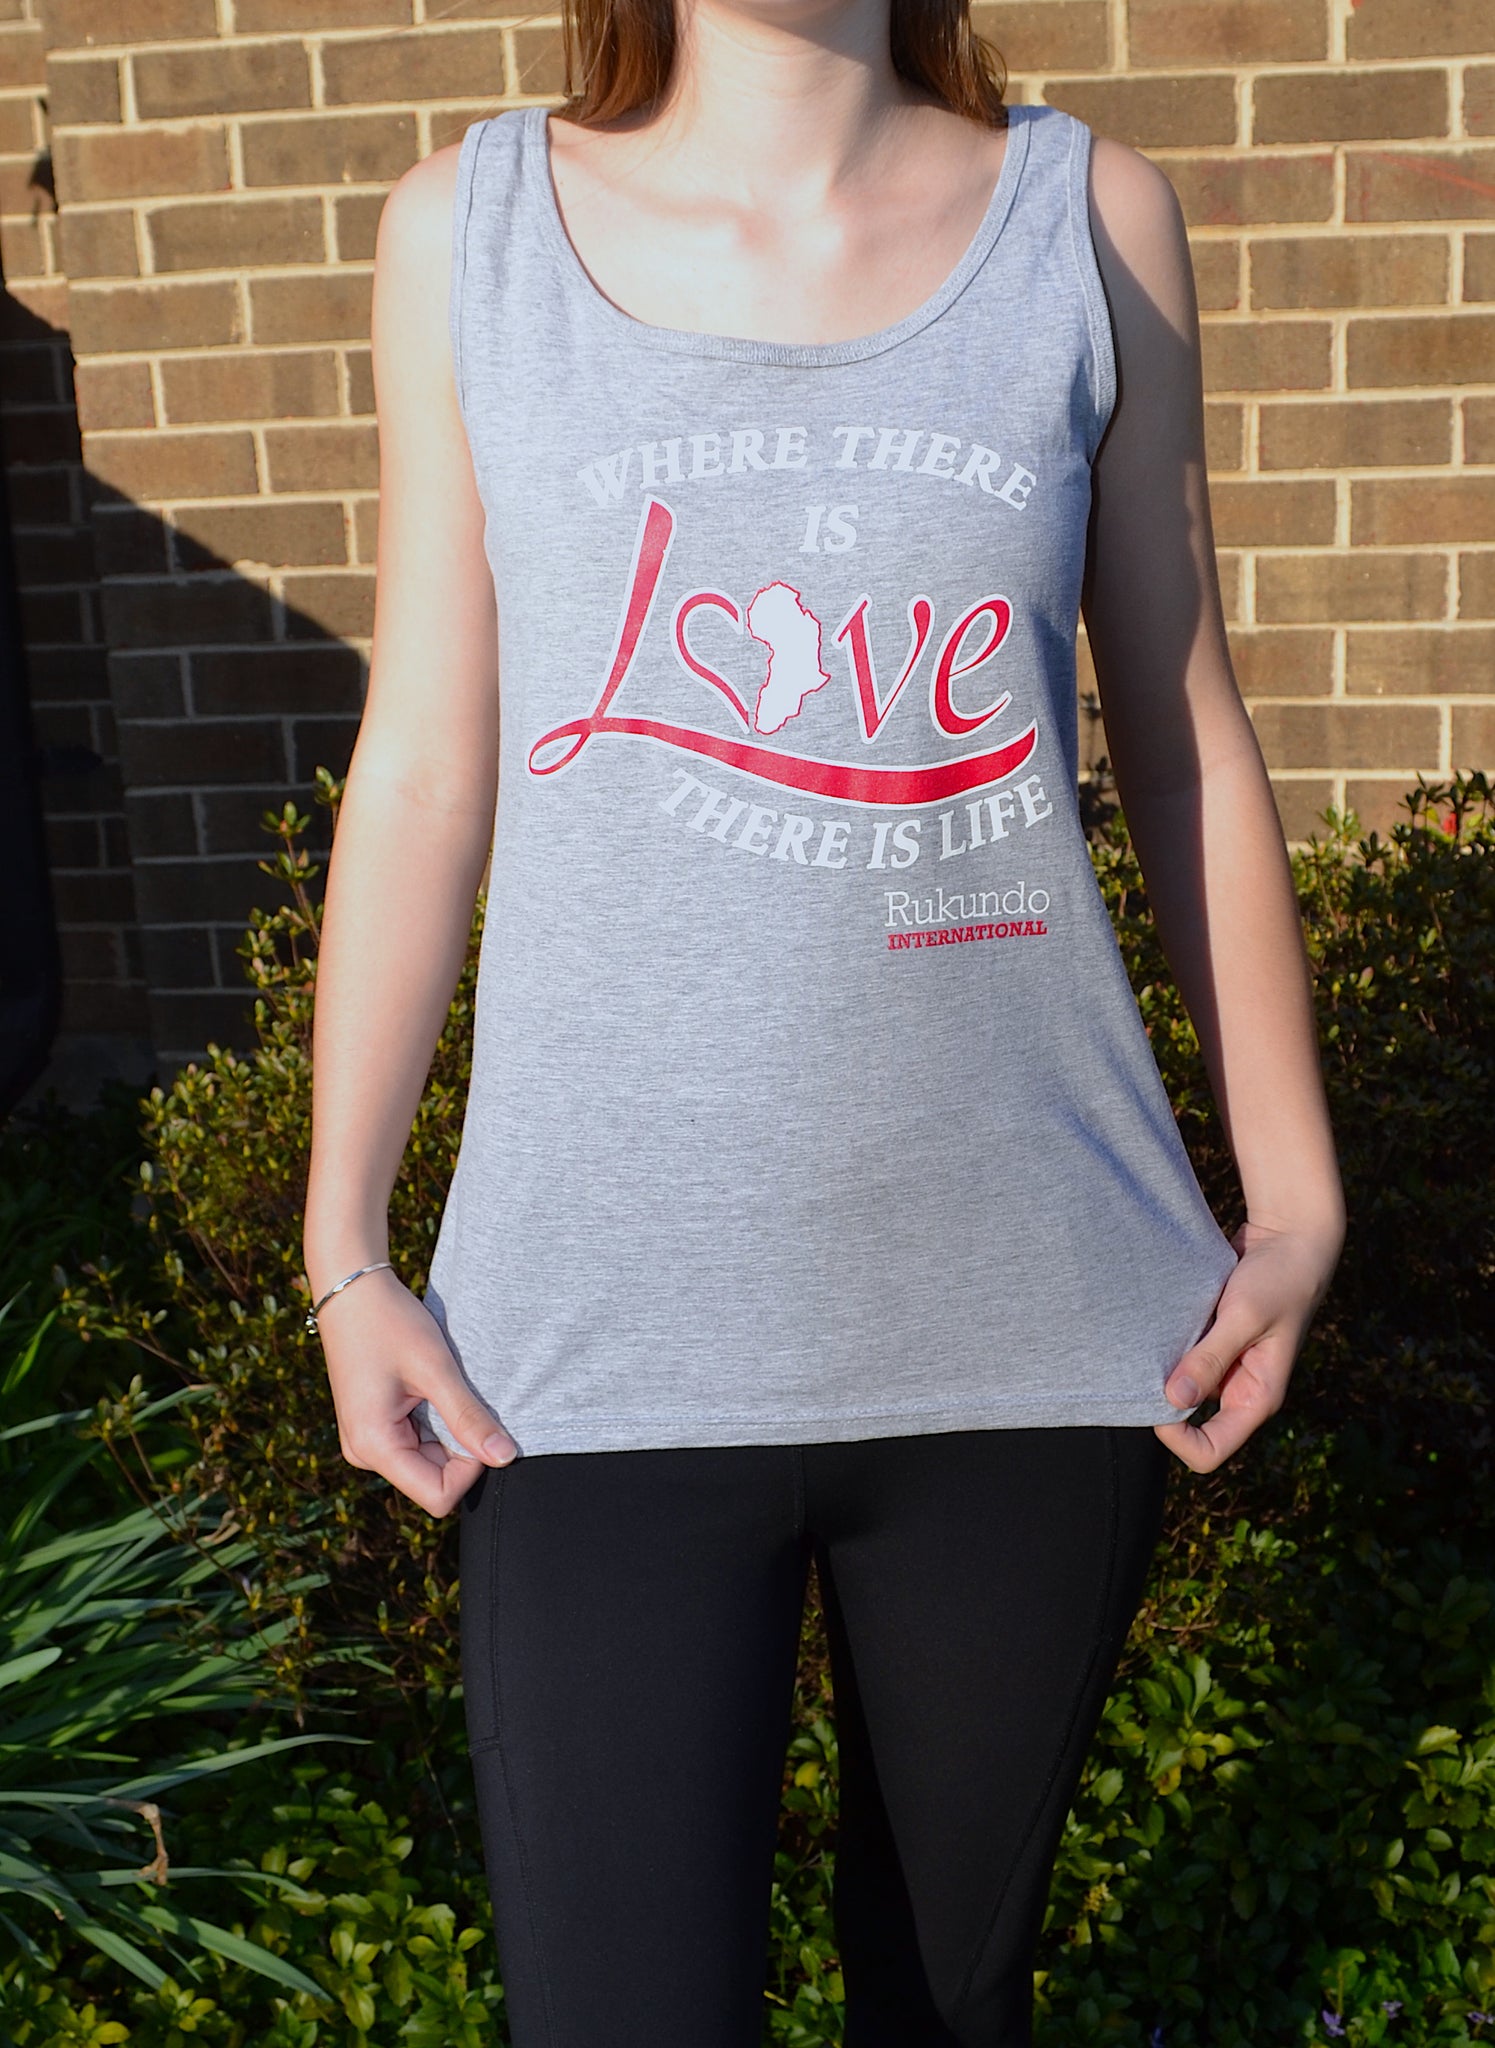 "Where There is Love" Tank Top (Junior's Sizing)